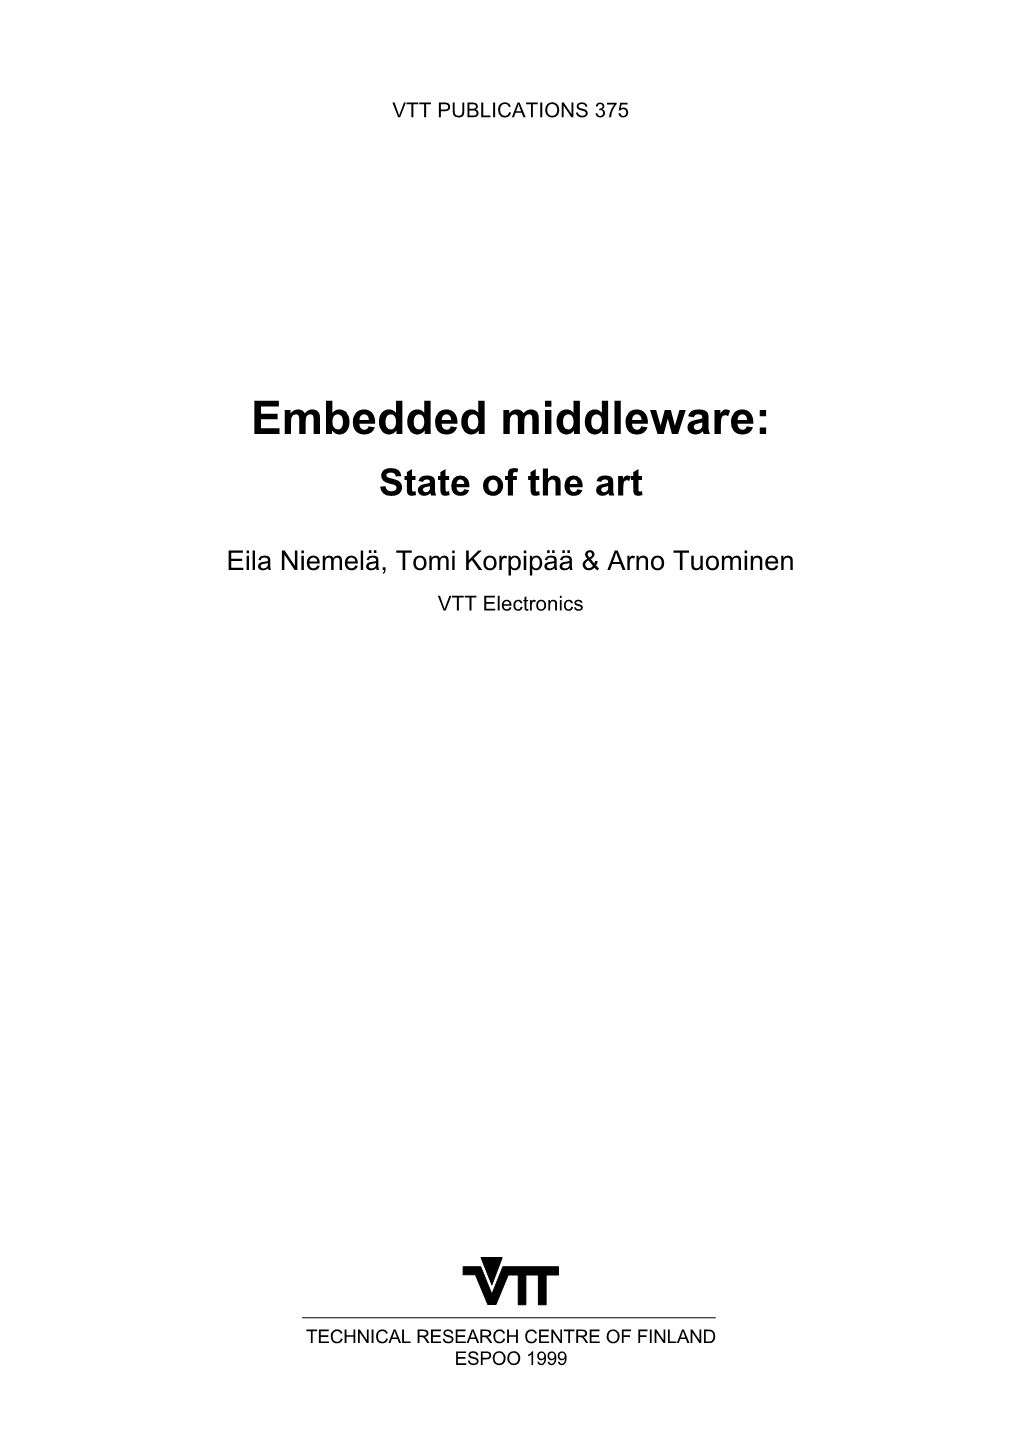 Embedded Middleware: State of the Art